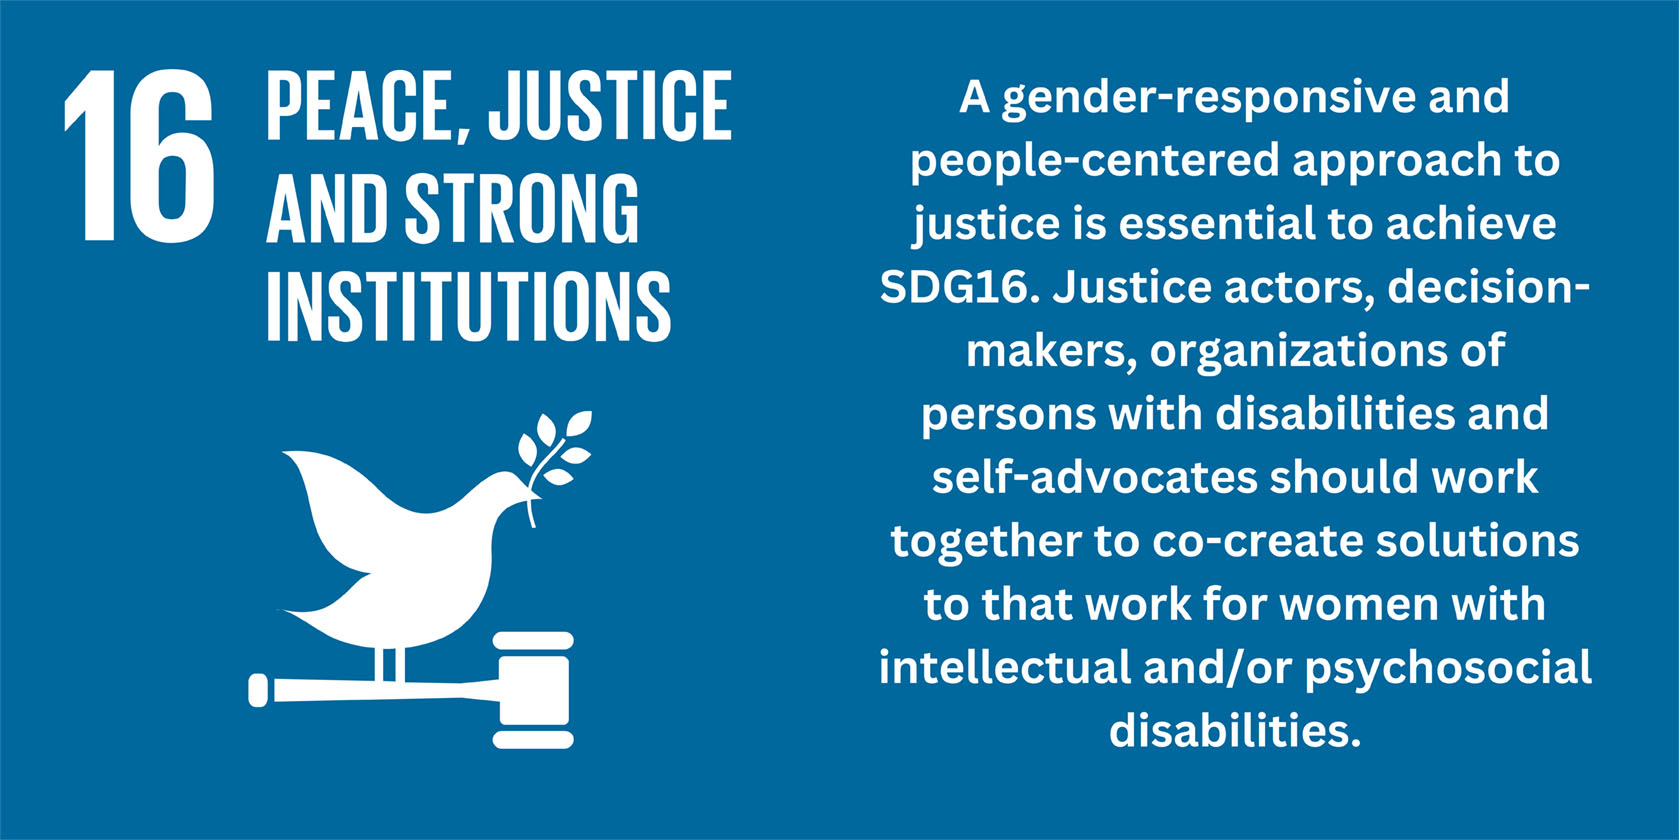 A gender-responsive and people-centered approach to justice is essential to achieve SDG16. Justice actors, decision-makers, organizations of persons with disabilities and self-advocates should work together to co-create solutions to that work for women with intellectual and/or psychosocial disabilities.